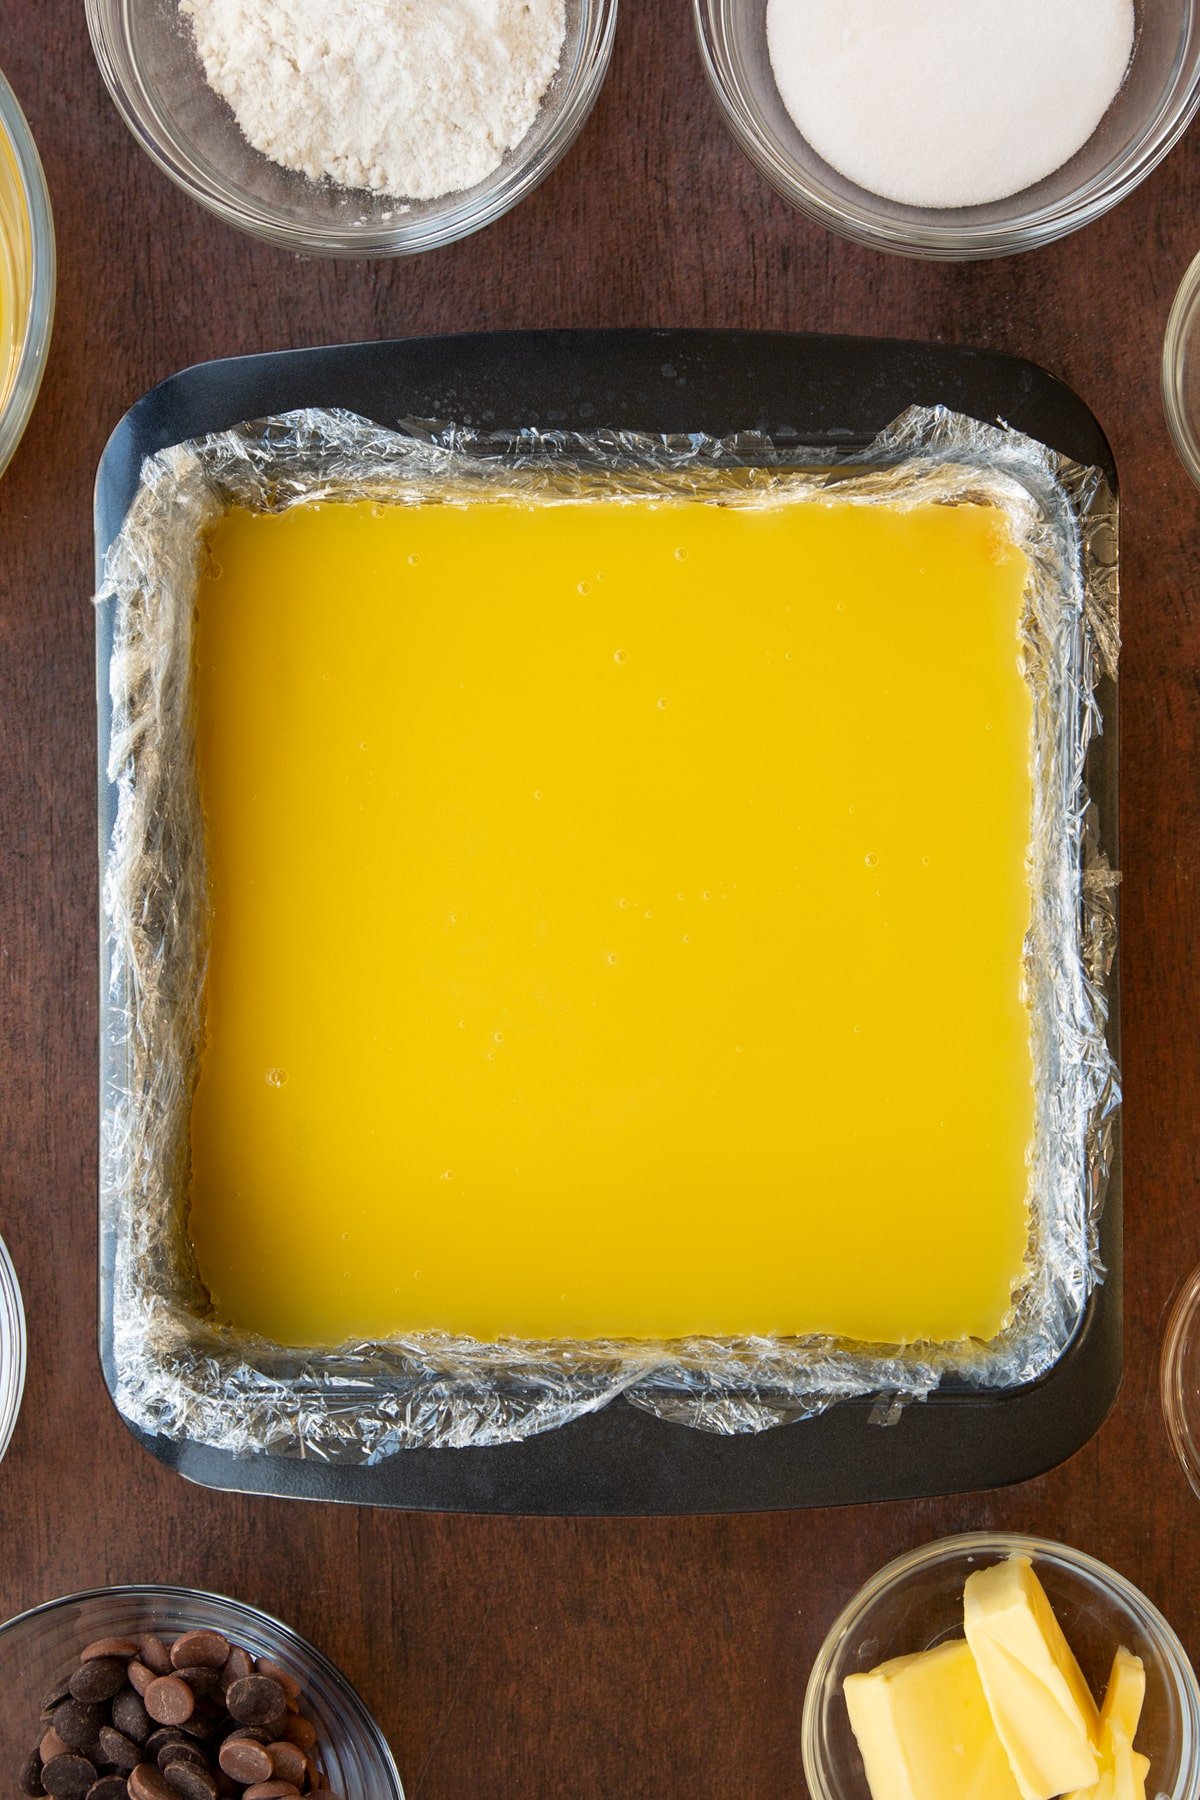 Pouring the orange juice geletine mixture into the baking tray and leaving to cool until it's just at the point of setting.